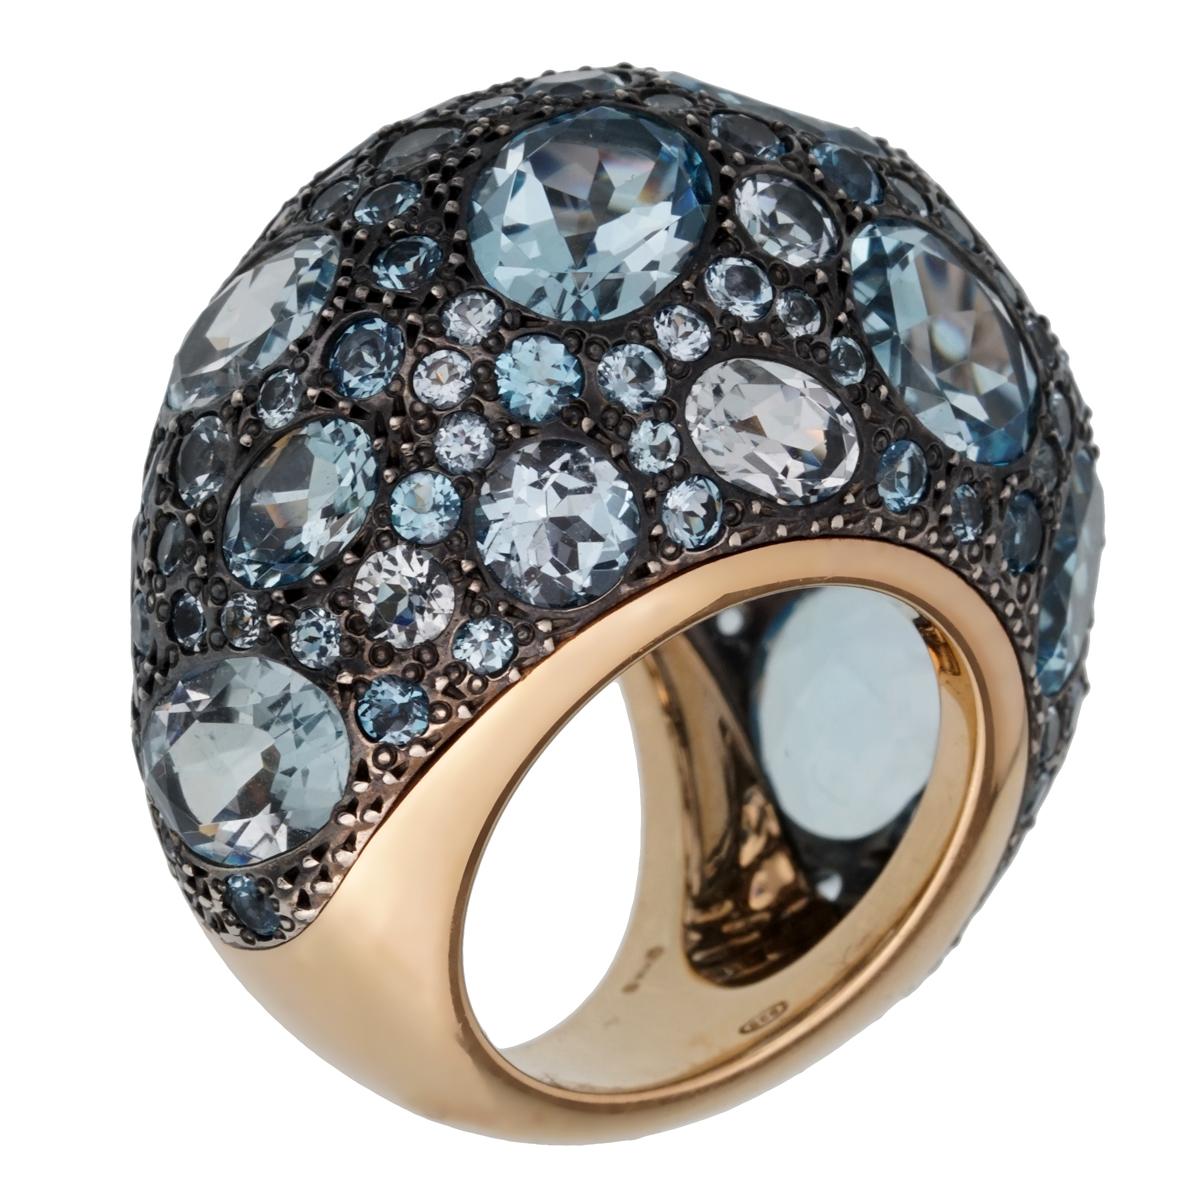 A magnificent bombe style brand new ring by Pomellato showcasing 12ct of multiple shaped topaz set in shimmering 18k rose gold. The ring measures a size 7 and can be resized.

Pomellato Retail Price: 9000
Sku: 2462